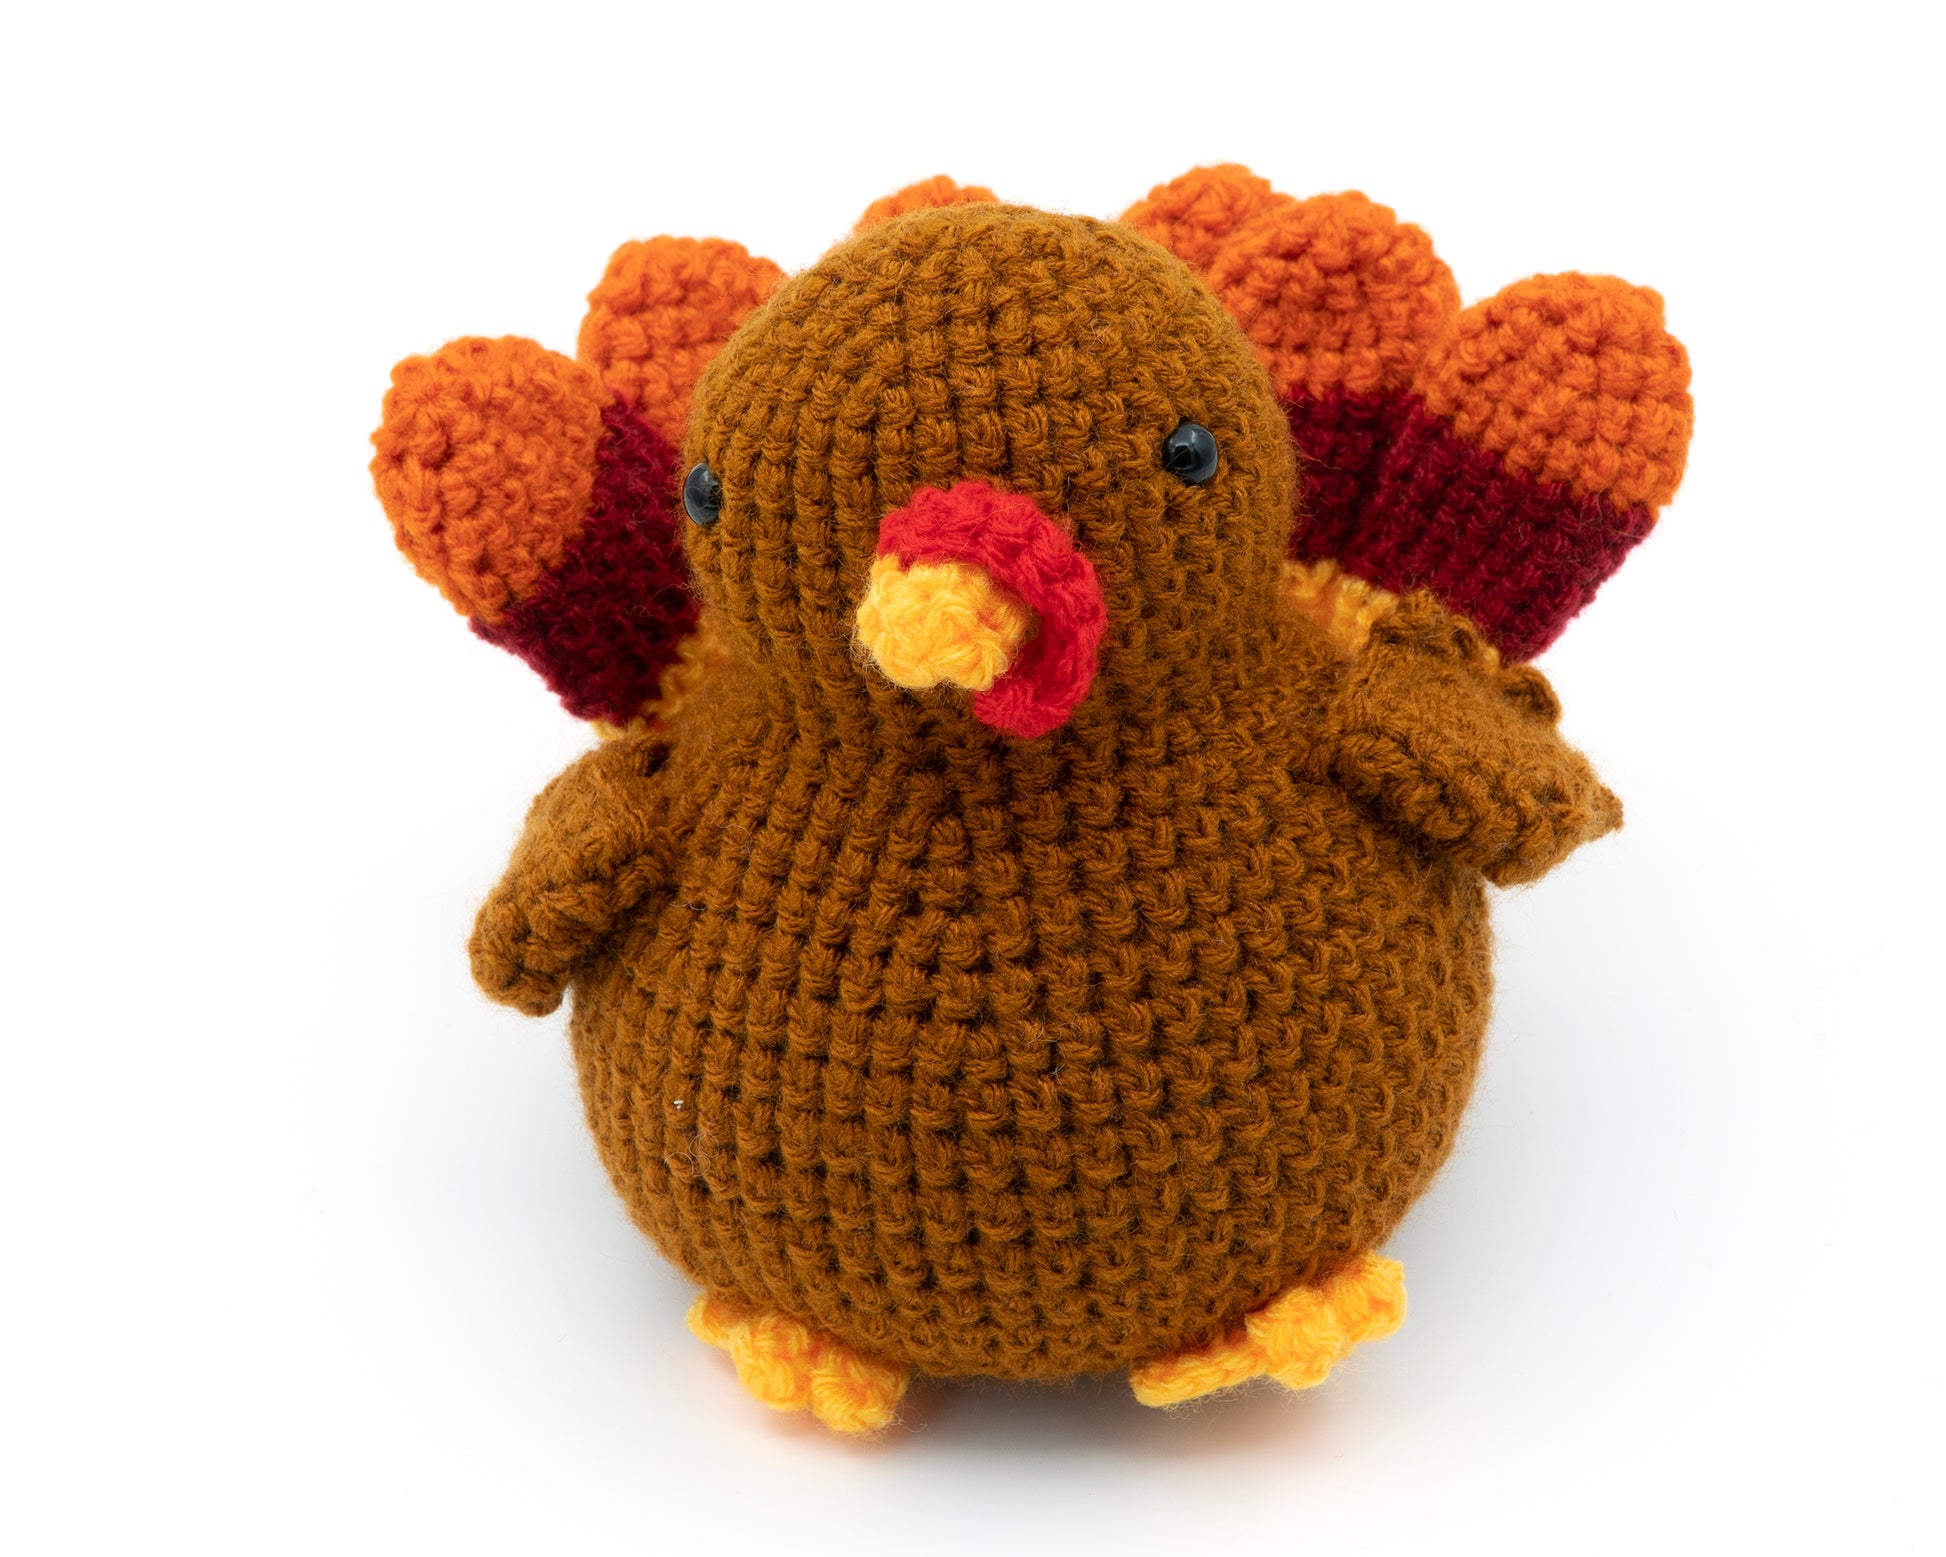 amigurumi crochet turkey pattern front view with colorful tail feathers